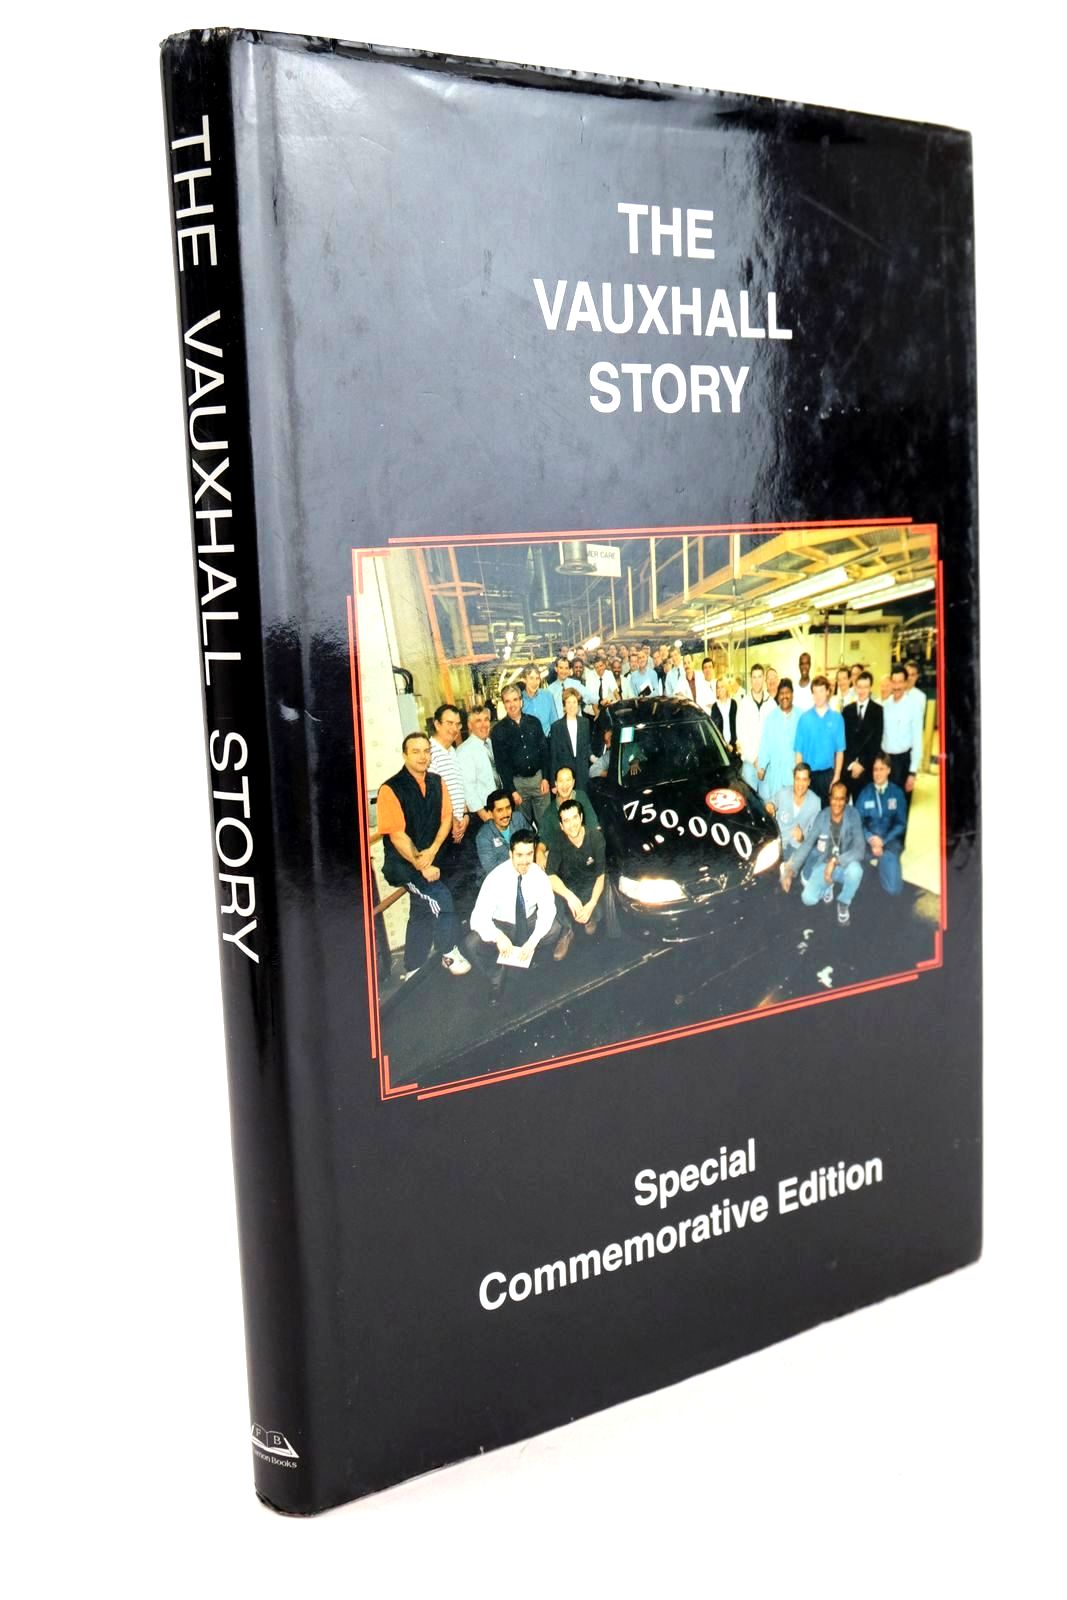 Photo of THE VAUXHALL STORY written by Hart, Richard published by Farnon Books (STOCK CODE: 1324213)  for sale by Stella & Rose's Books